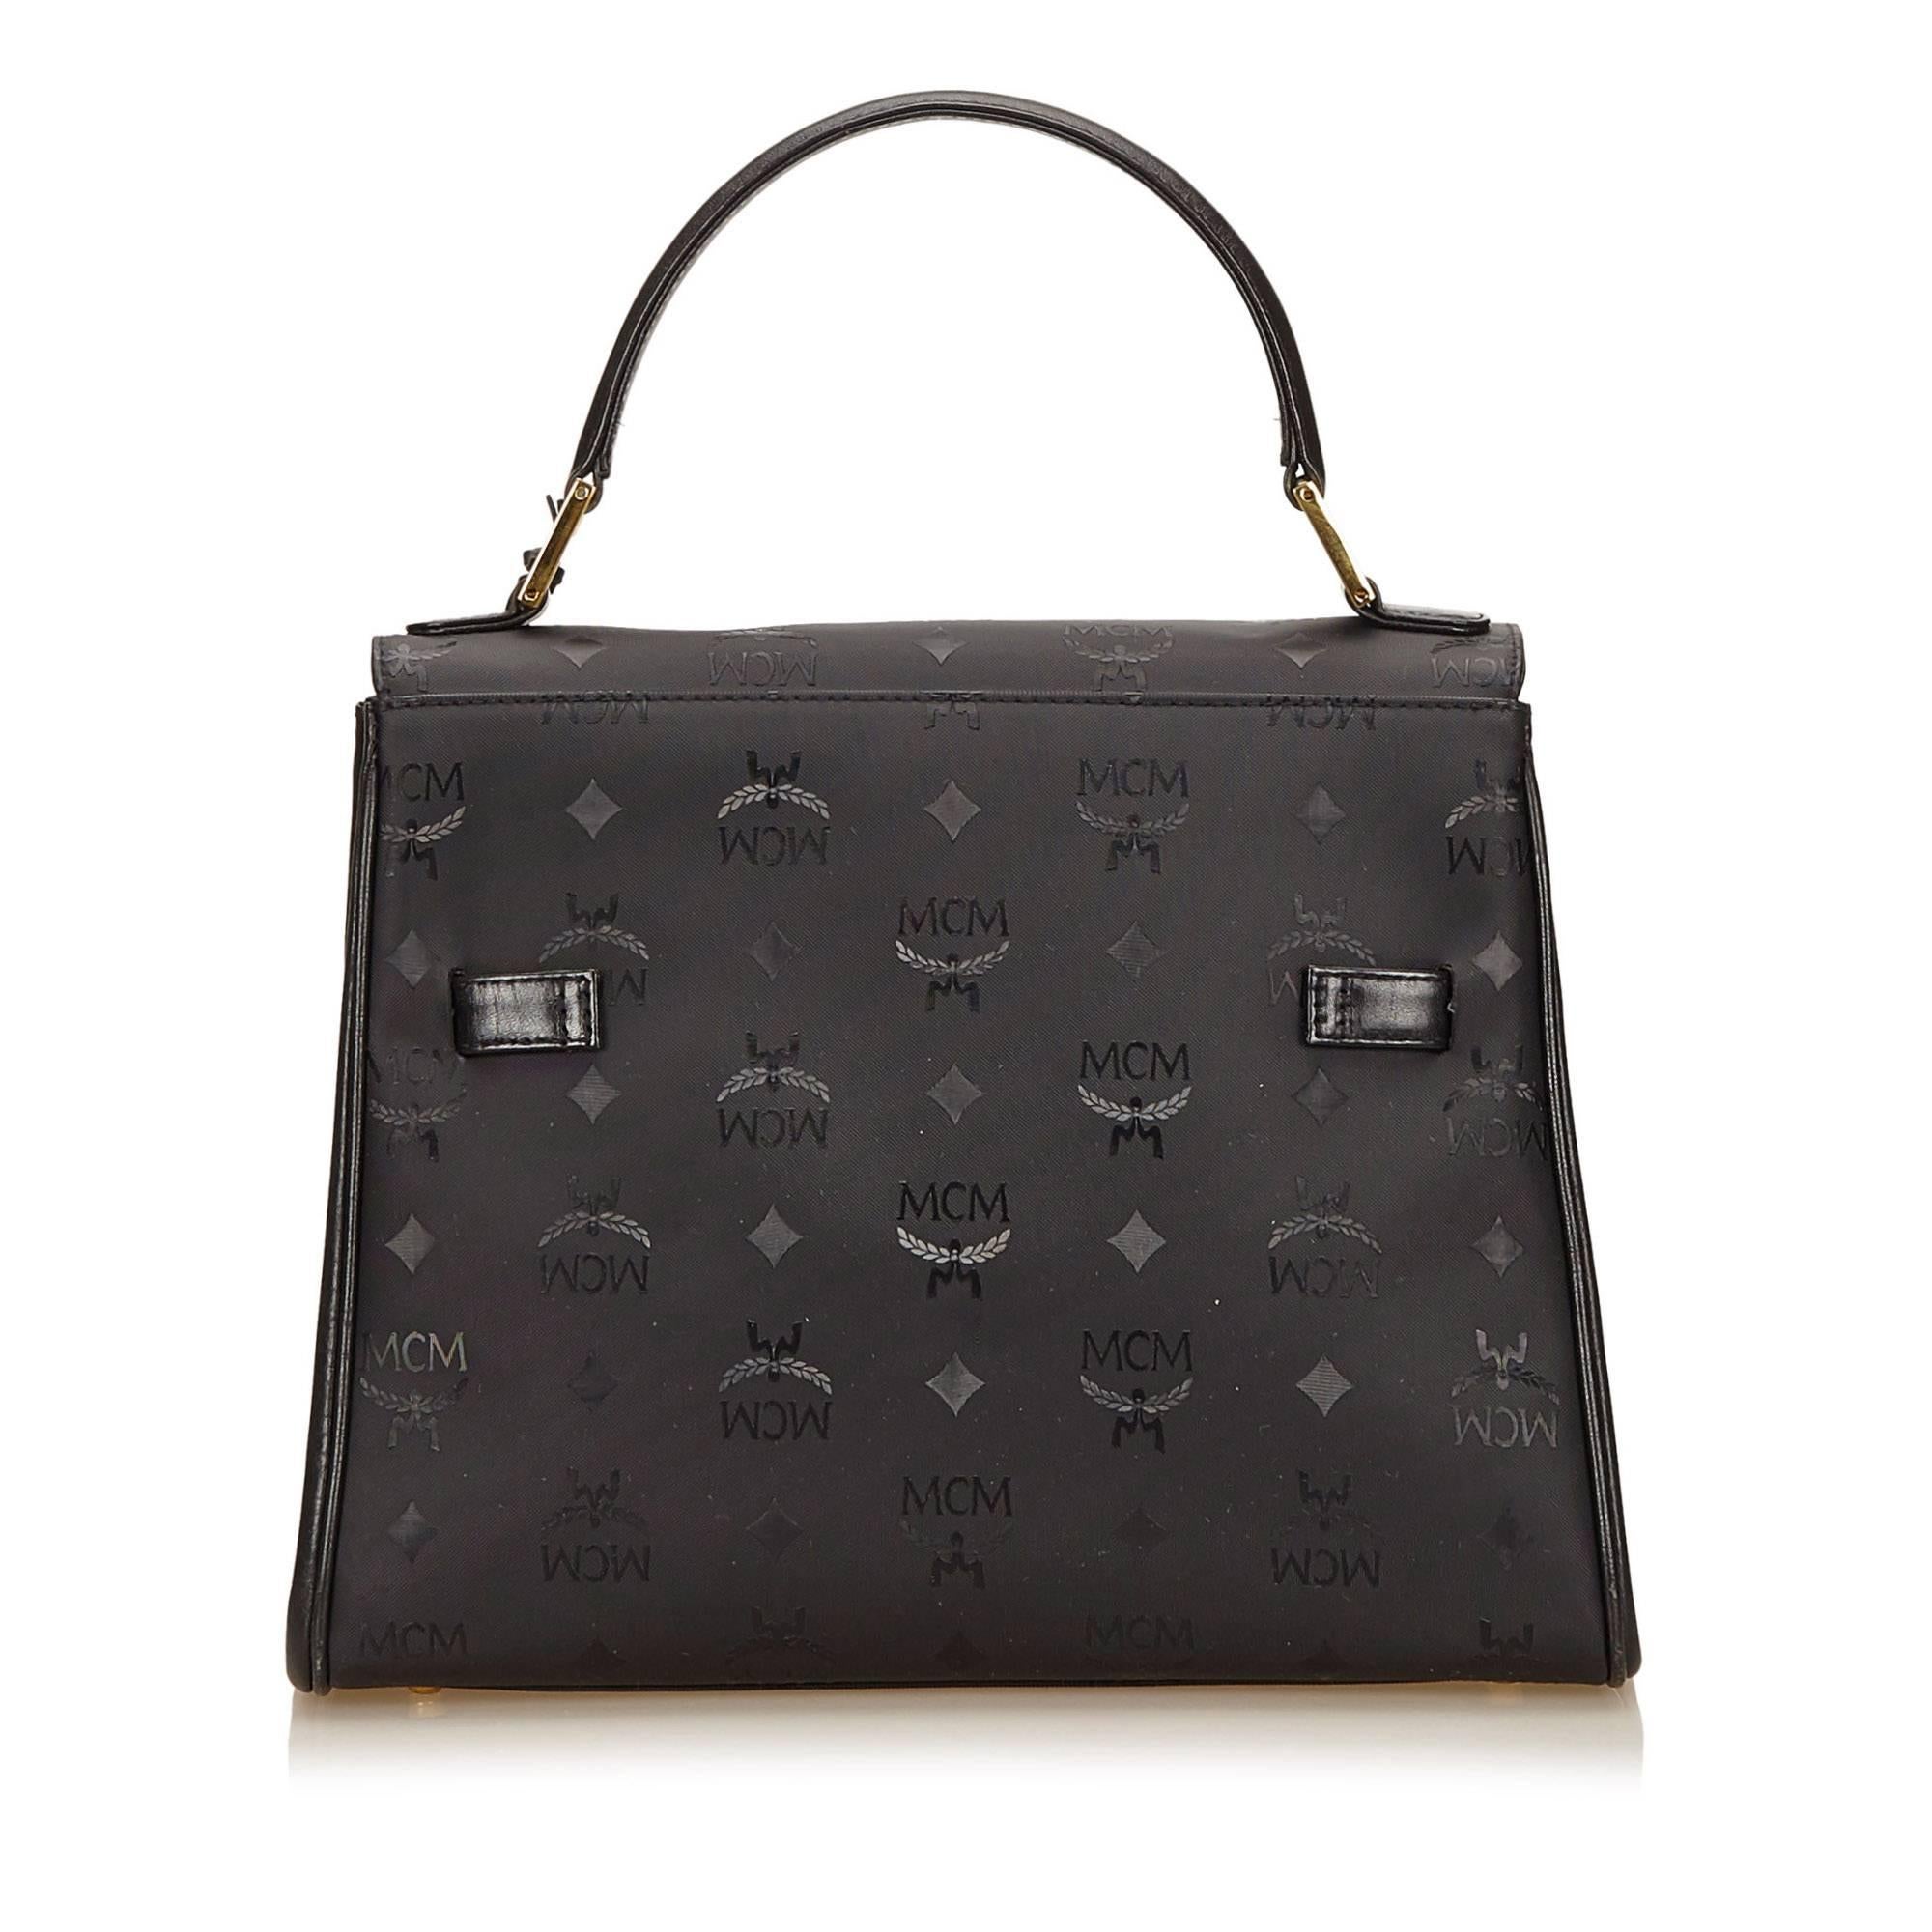 Product details: Black PVC top handle Visetos bag by MCM. Accented with tonal logo details. Top carry handle. Front flap with twist-lock closure and lock and key. Leather lined interior with inner open compartments and zip and slide pockets.